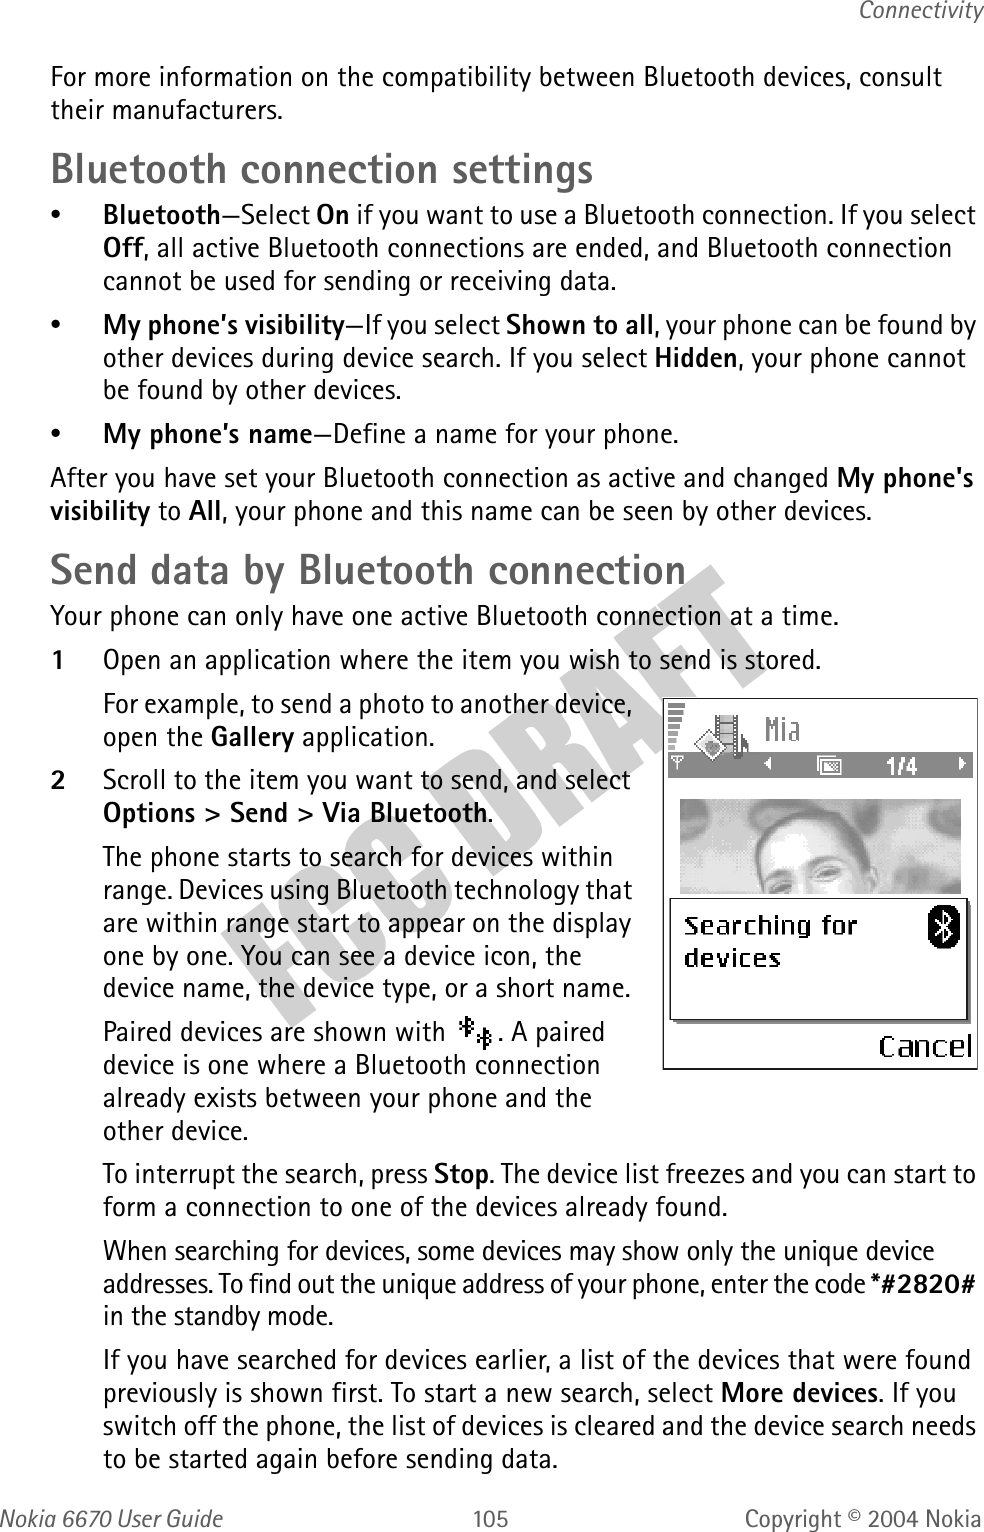 Nokia  User GuideCopyright © 2004 NokiaConnectivityFor more information on the compatibility between Bluetooth devices, consult their manufacturers.Bluetooth connection settings•Bluetooth—Select On if you want to use a Bluetooth connection. If you select Off, all active Bluetooth connections are ended, and Bluetooth connection cannot be used for sending or receiving data.•My phone’s visibility—If you select Shown to all, your phone can be found by other devices during device search. If you select Hidden, your phone cannot be found by other devices. •My phone’s name—Define a name for your phone. After you have set your Bluetooth connection as active and changed My phone&apos;s visibility to All, your phone and this name can be seen by other devices.Send data by Bluetooth connectionYour phone can only have one active Bluetooth connection at a time.1Open an application where the item you wish to send is stored.For example, to send a photo to another device, open the Gallery application. 2Scroll to the item you want to send, and select Options &gt; Send &gt; Via Bluetooth.The phone starts to search for devices within range. Devices using Bluetooth technology that are within range start to appear on the display one by one. You can see a device icon, the device name, the device type, or a short name. Paired devices are shown with  . A paired device is one where a Bluetooth connection already exists between your phone and the other device.To interrupt the search, press Stop. The device list freezes and you can start to form a connection to one of the devices already found.When searching for devices, some devices may show only the unique device addresses. To find out the unique address of your phone, enter the code *#2820# in the standby mode.If you have searched for devices earlier, a list of the devices that were found previously is shown first. To start a new search, select More devices. If you switch off the phone, the list of devices is cleared and the device search needs to be started again before sending data.